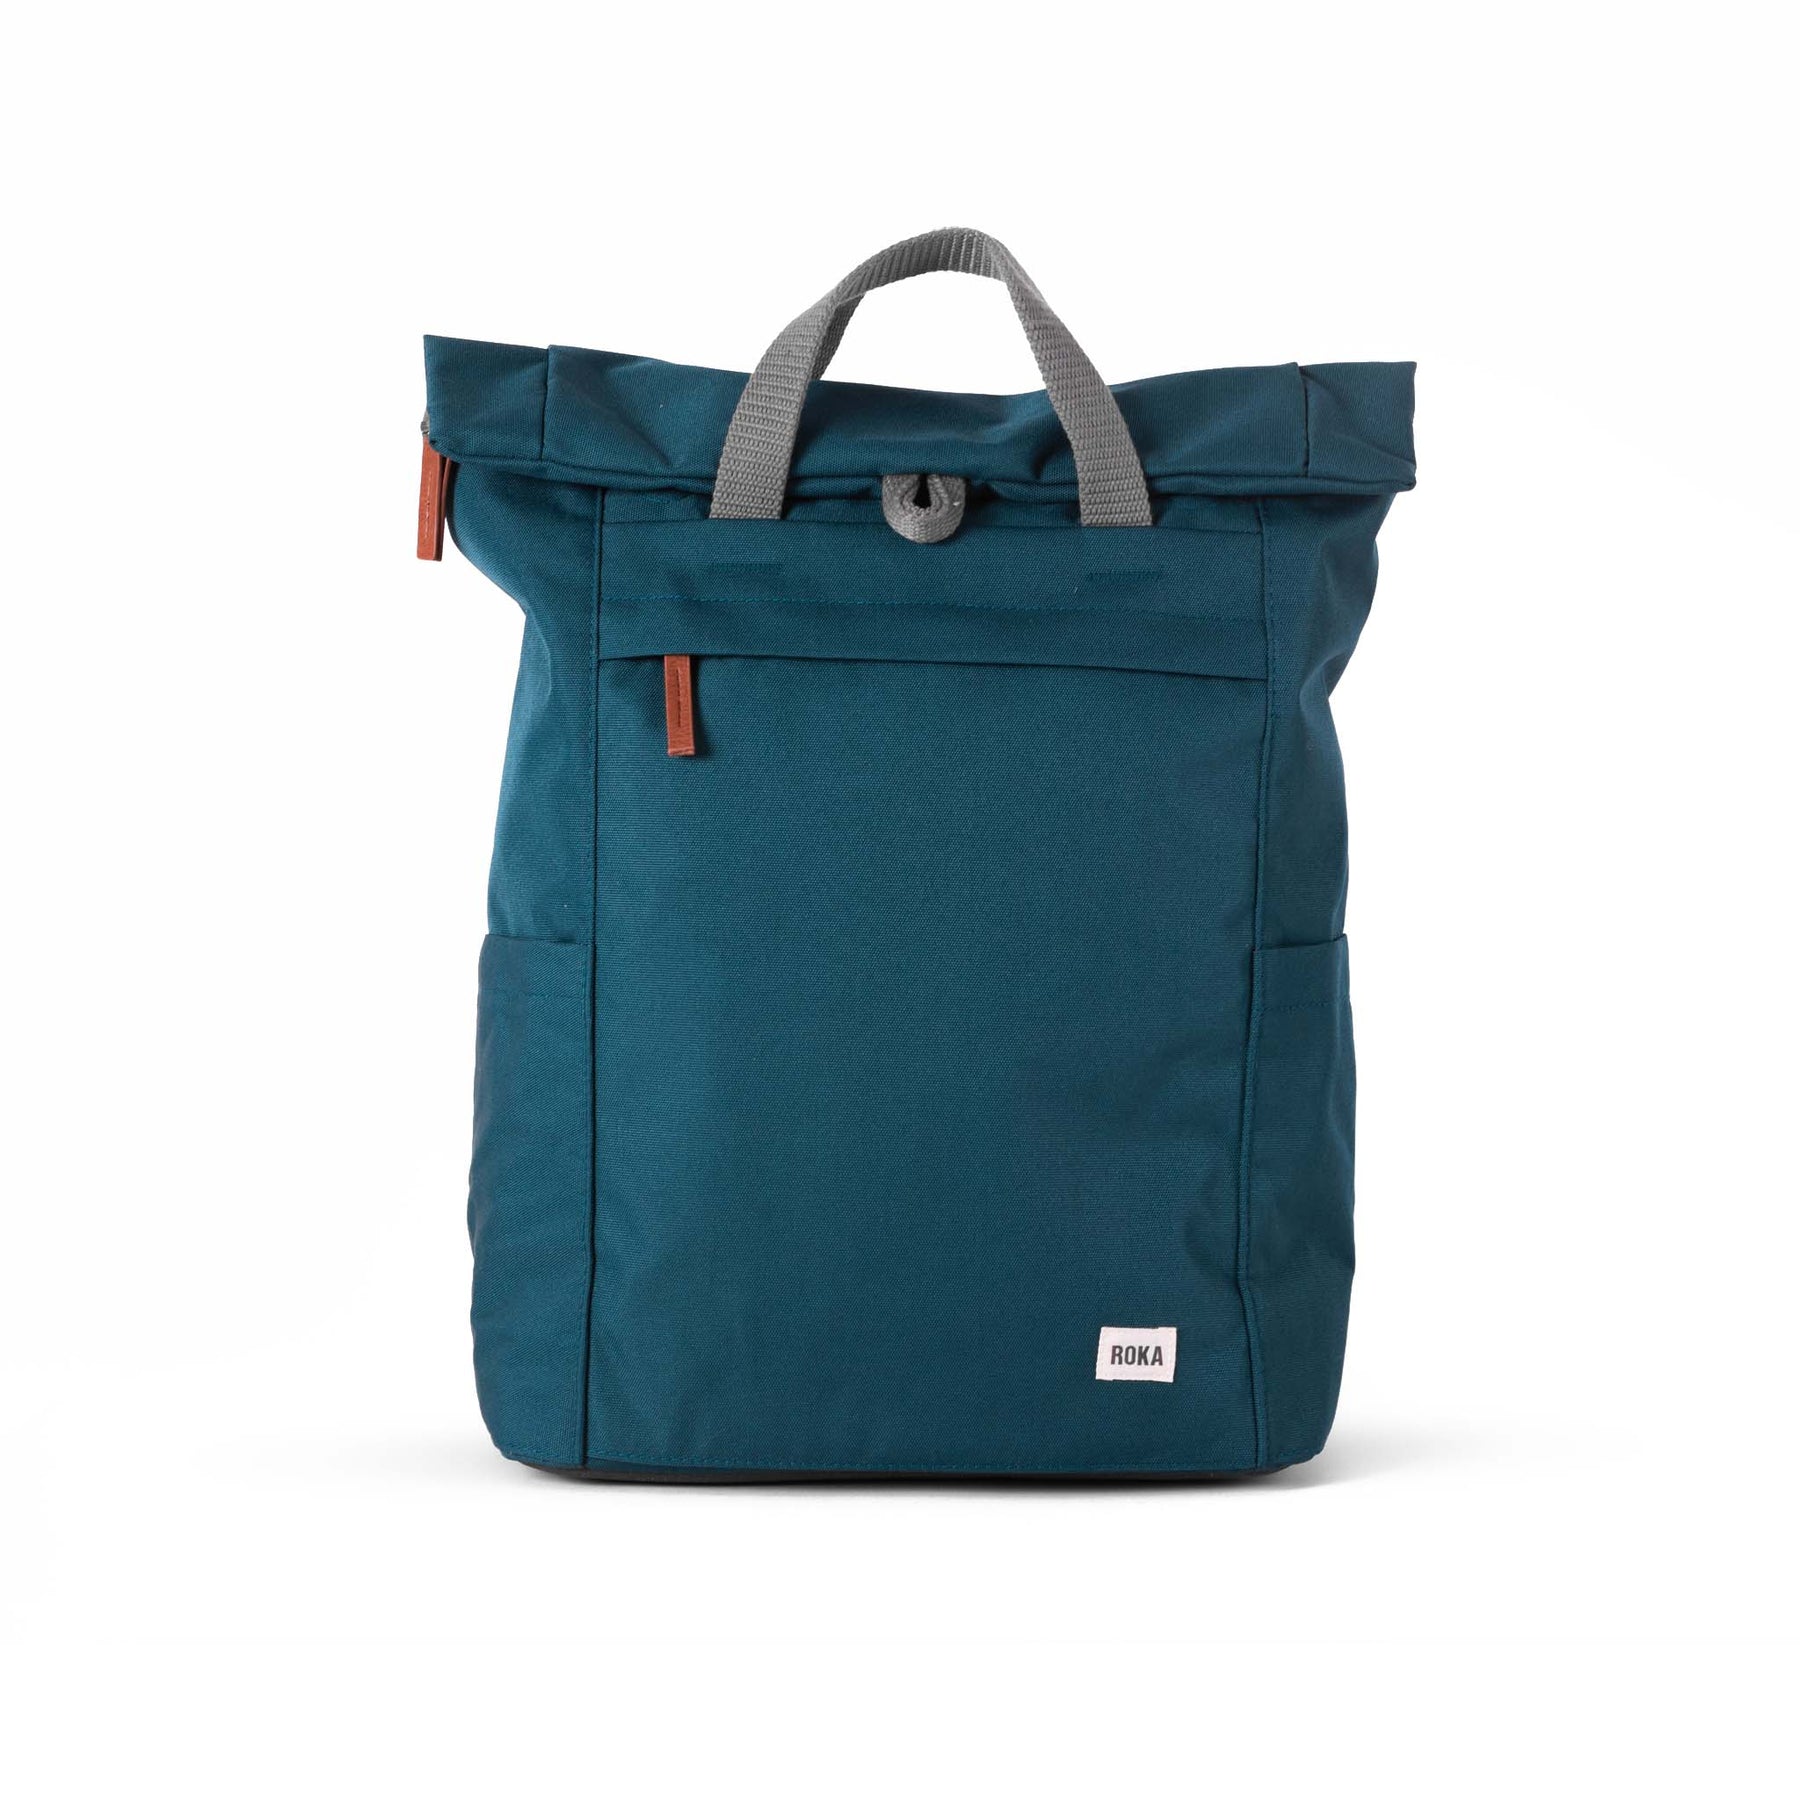 ROKA Finchley A Teal Large Recycled Canvas Bag - OS